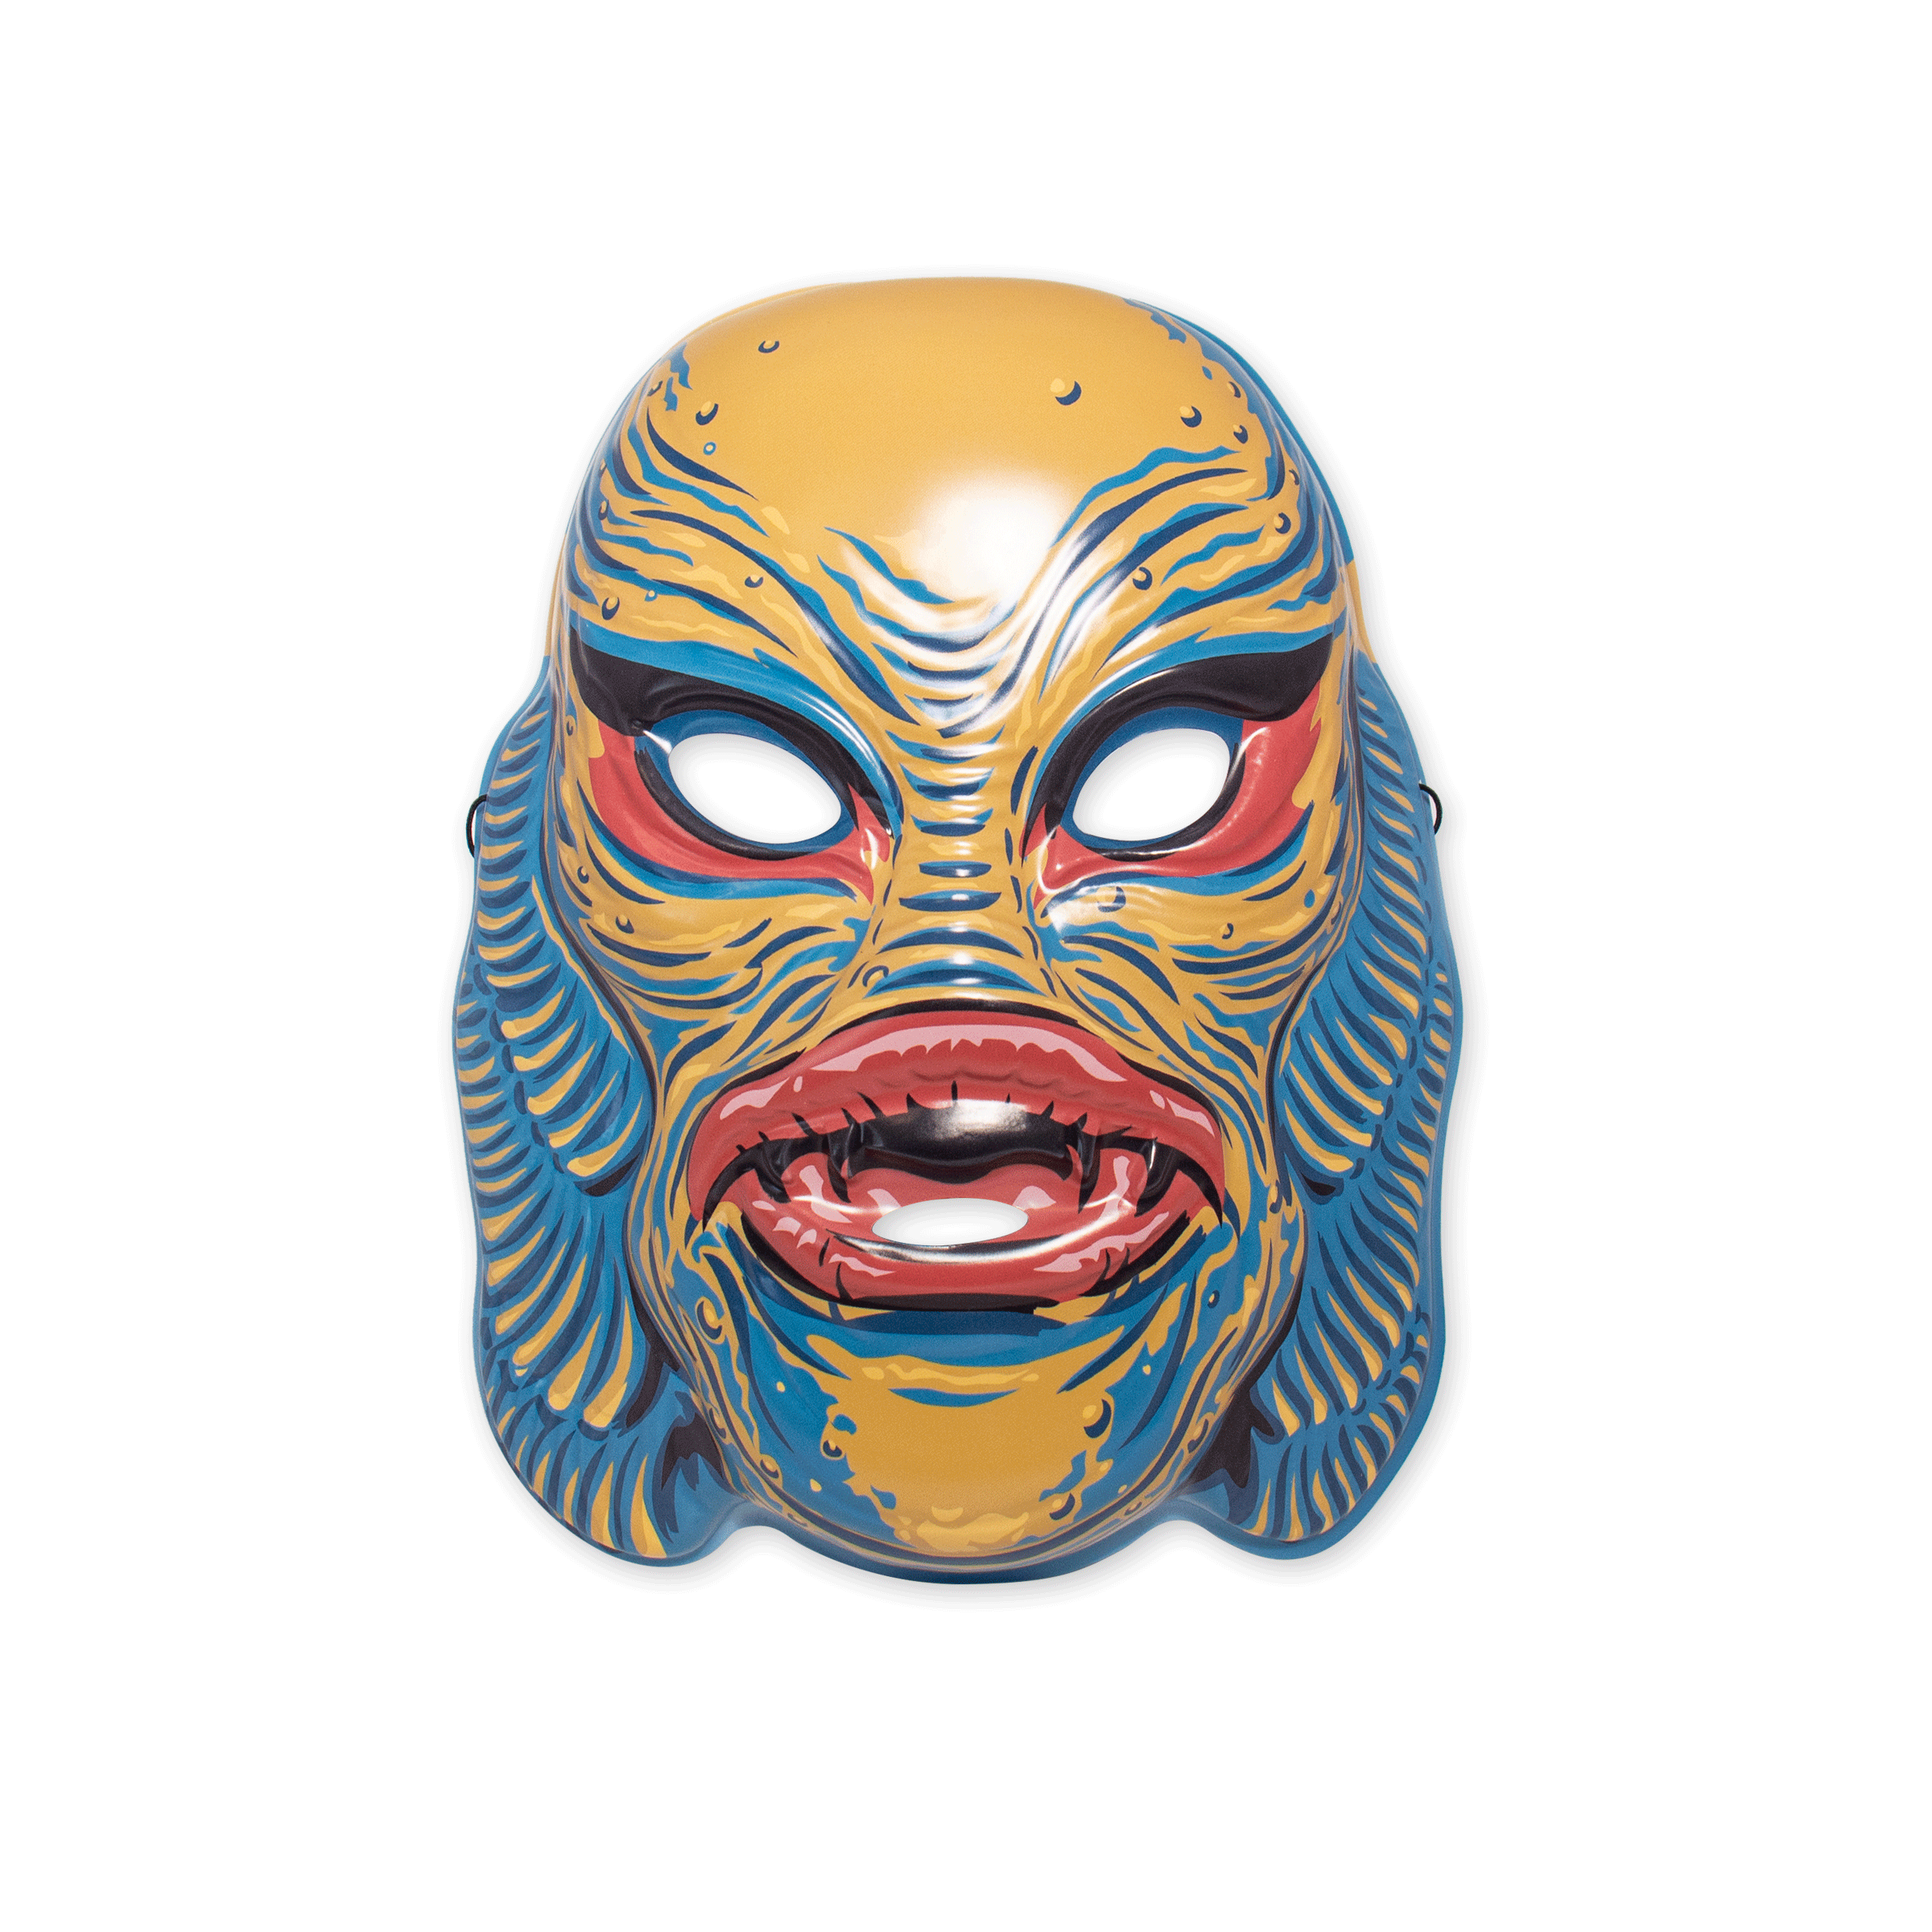 Universal Monsters Mask - Creature from the Black Lagoon (Yellow)